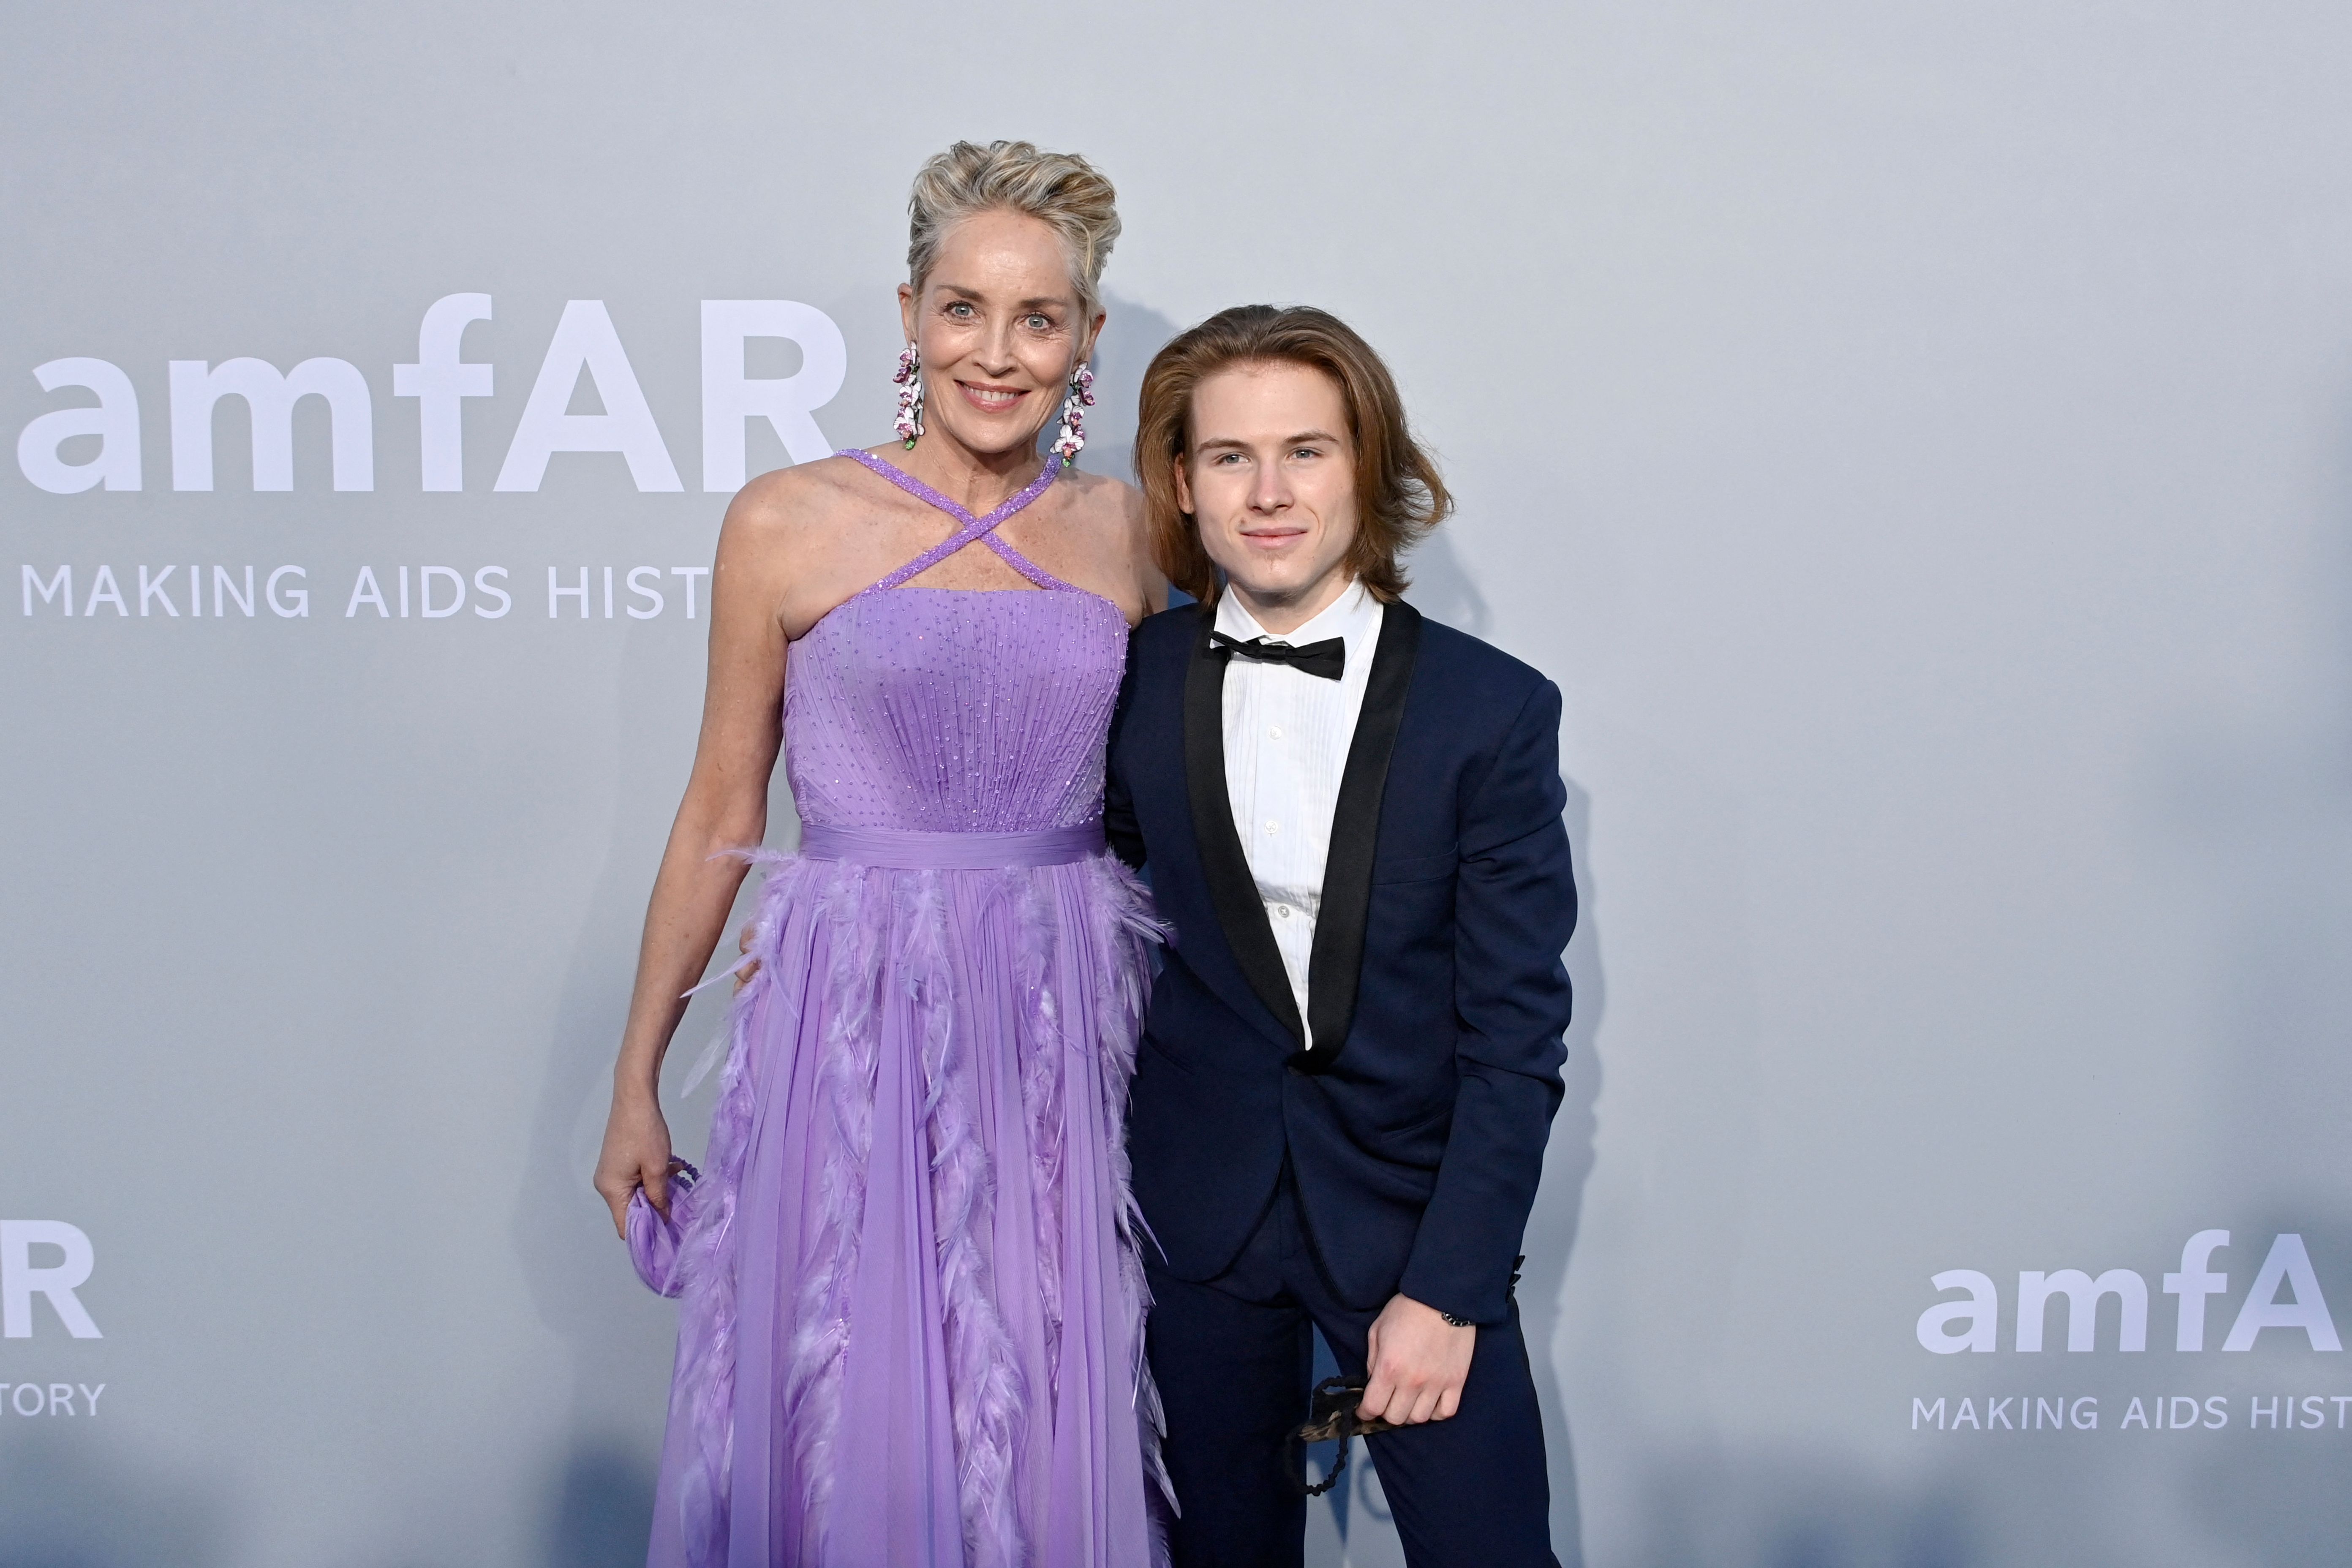 Sharon Stone and Roan Joseph Bernstein at the 74th Cannes Film Festival in Cannes, France on July 16, 2021 | Source: Getty Images